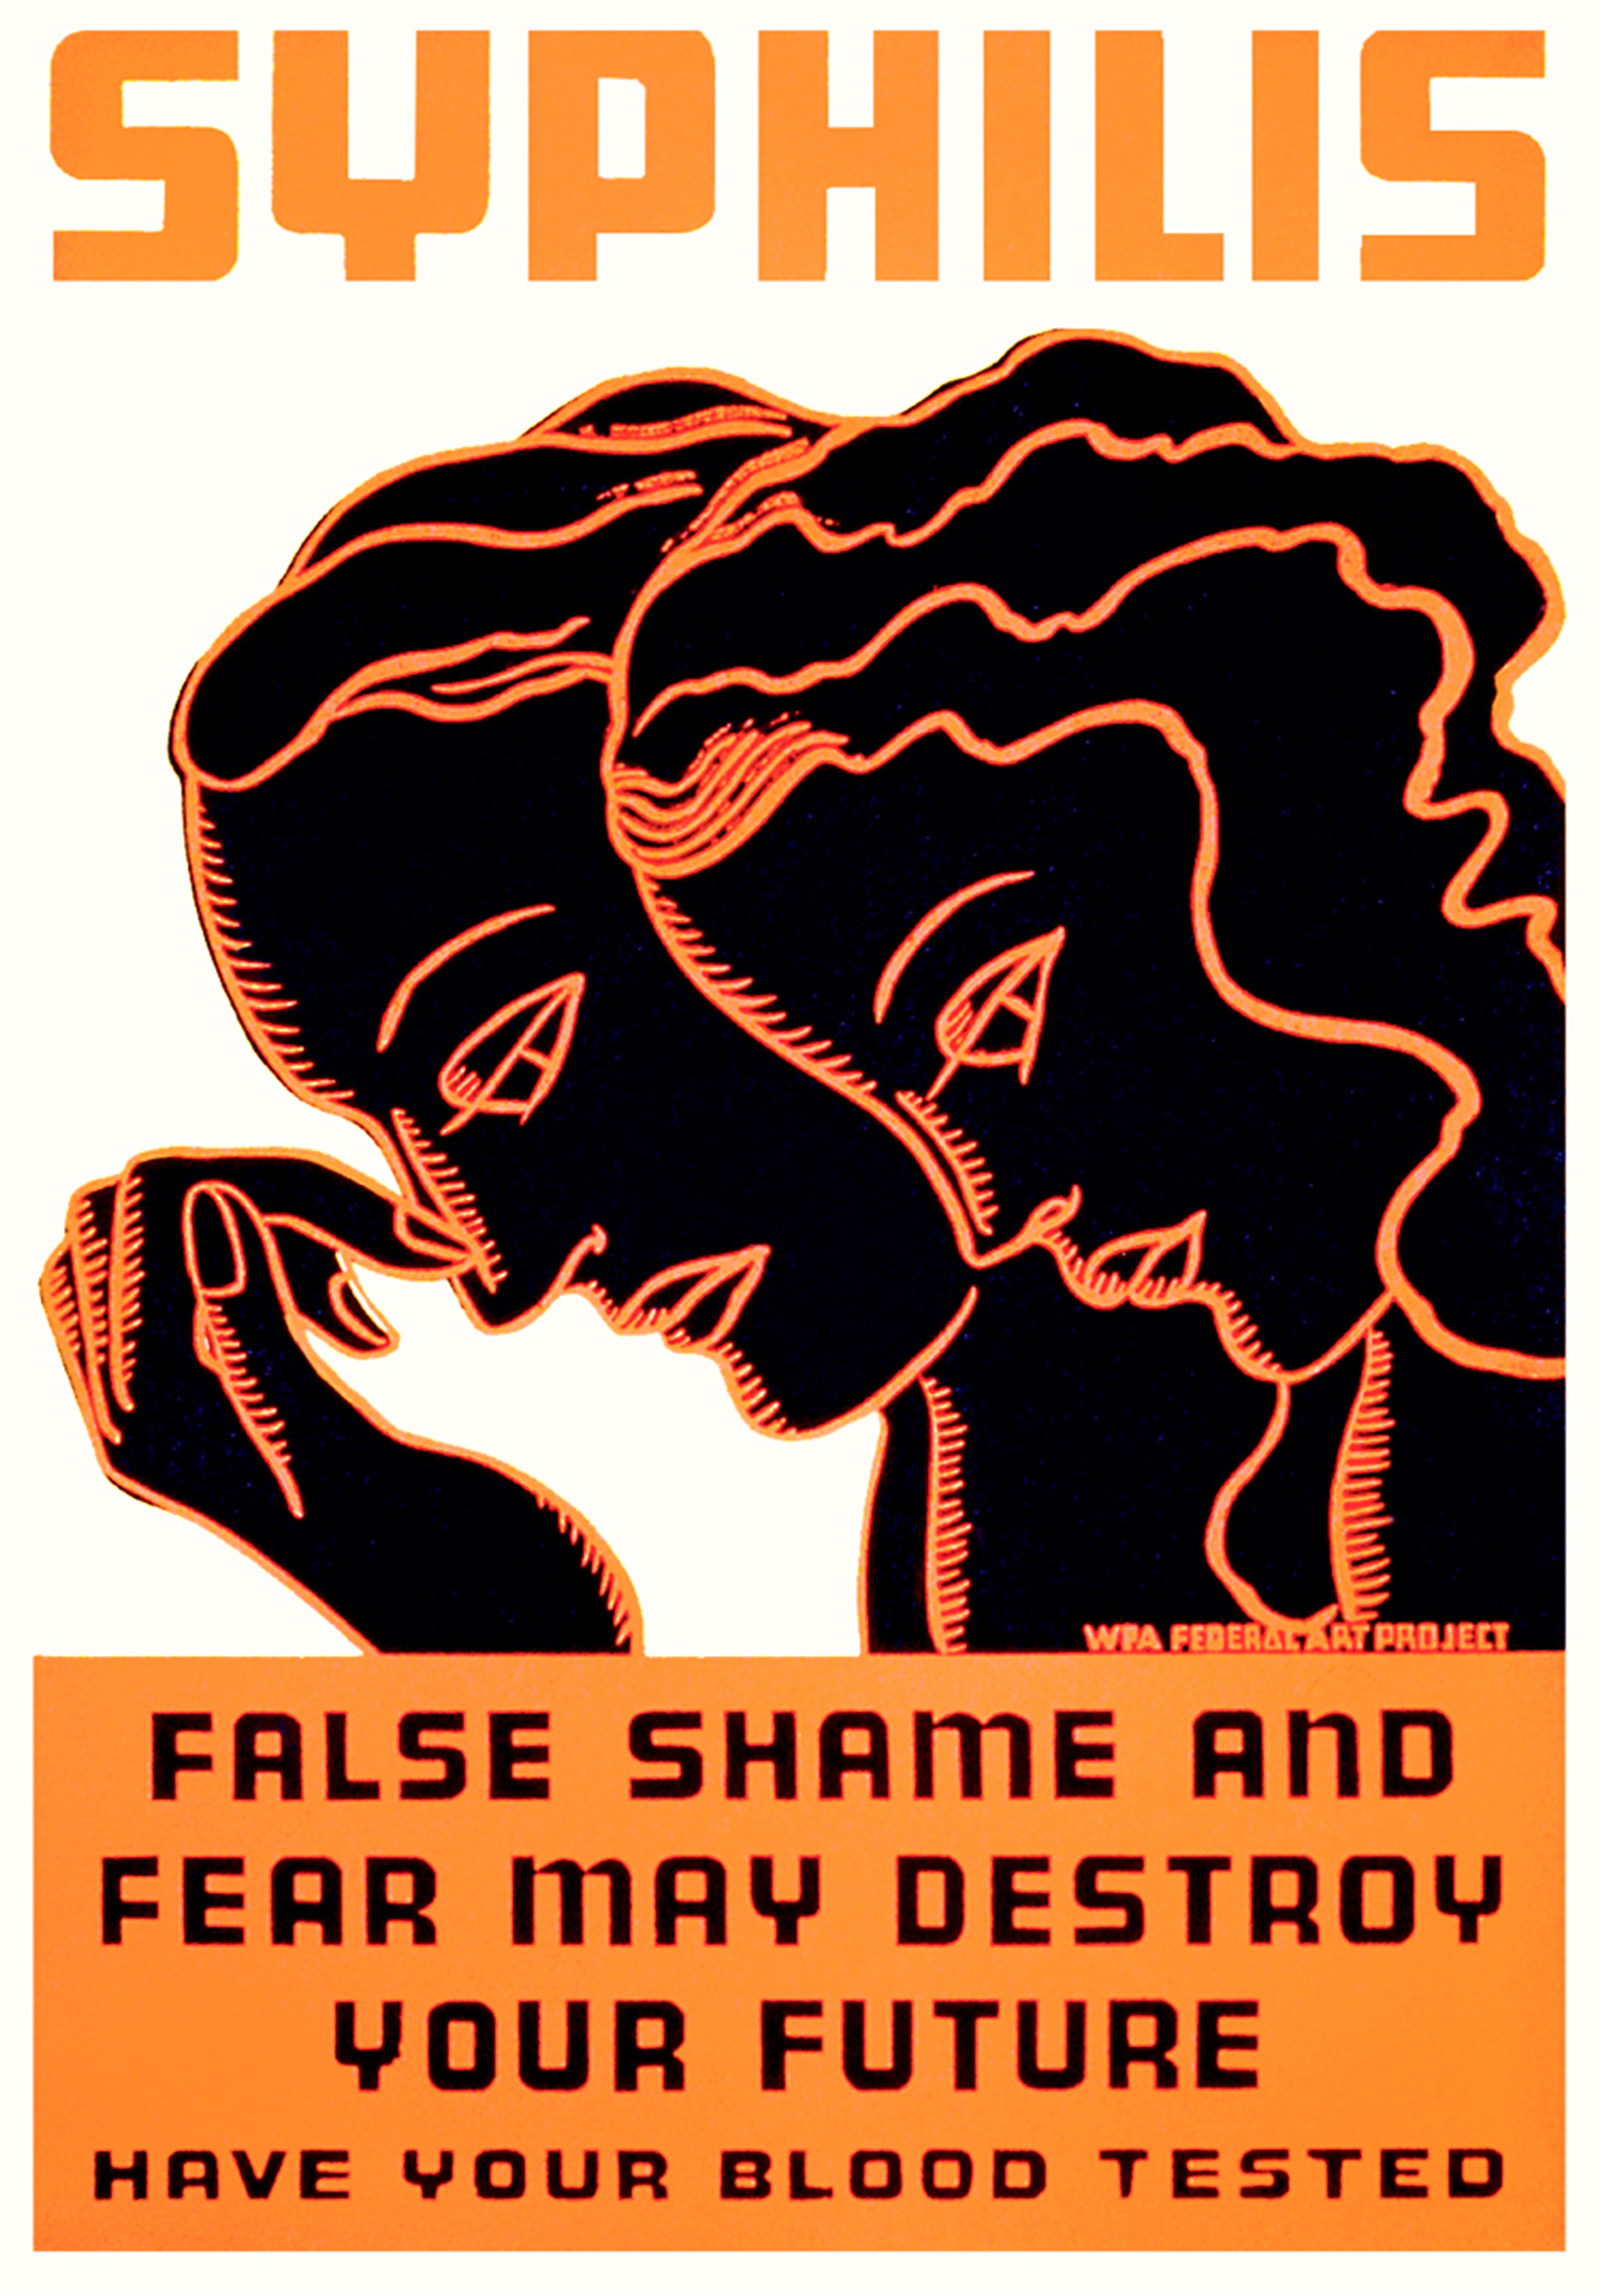 Poster designed by Erik Hans Krause for the WPA Federal
Art Project, 1938.